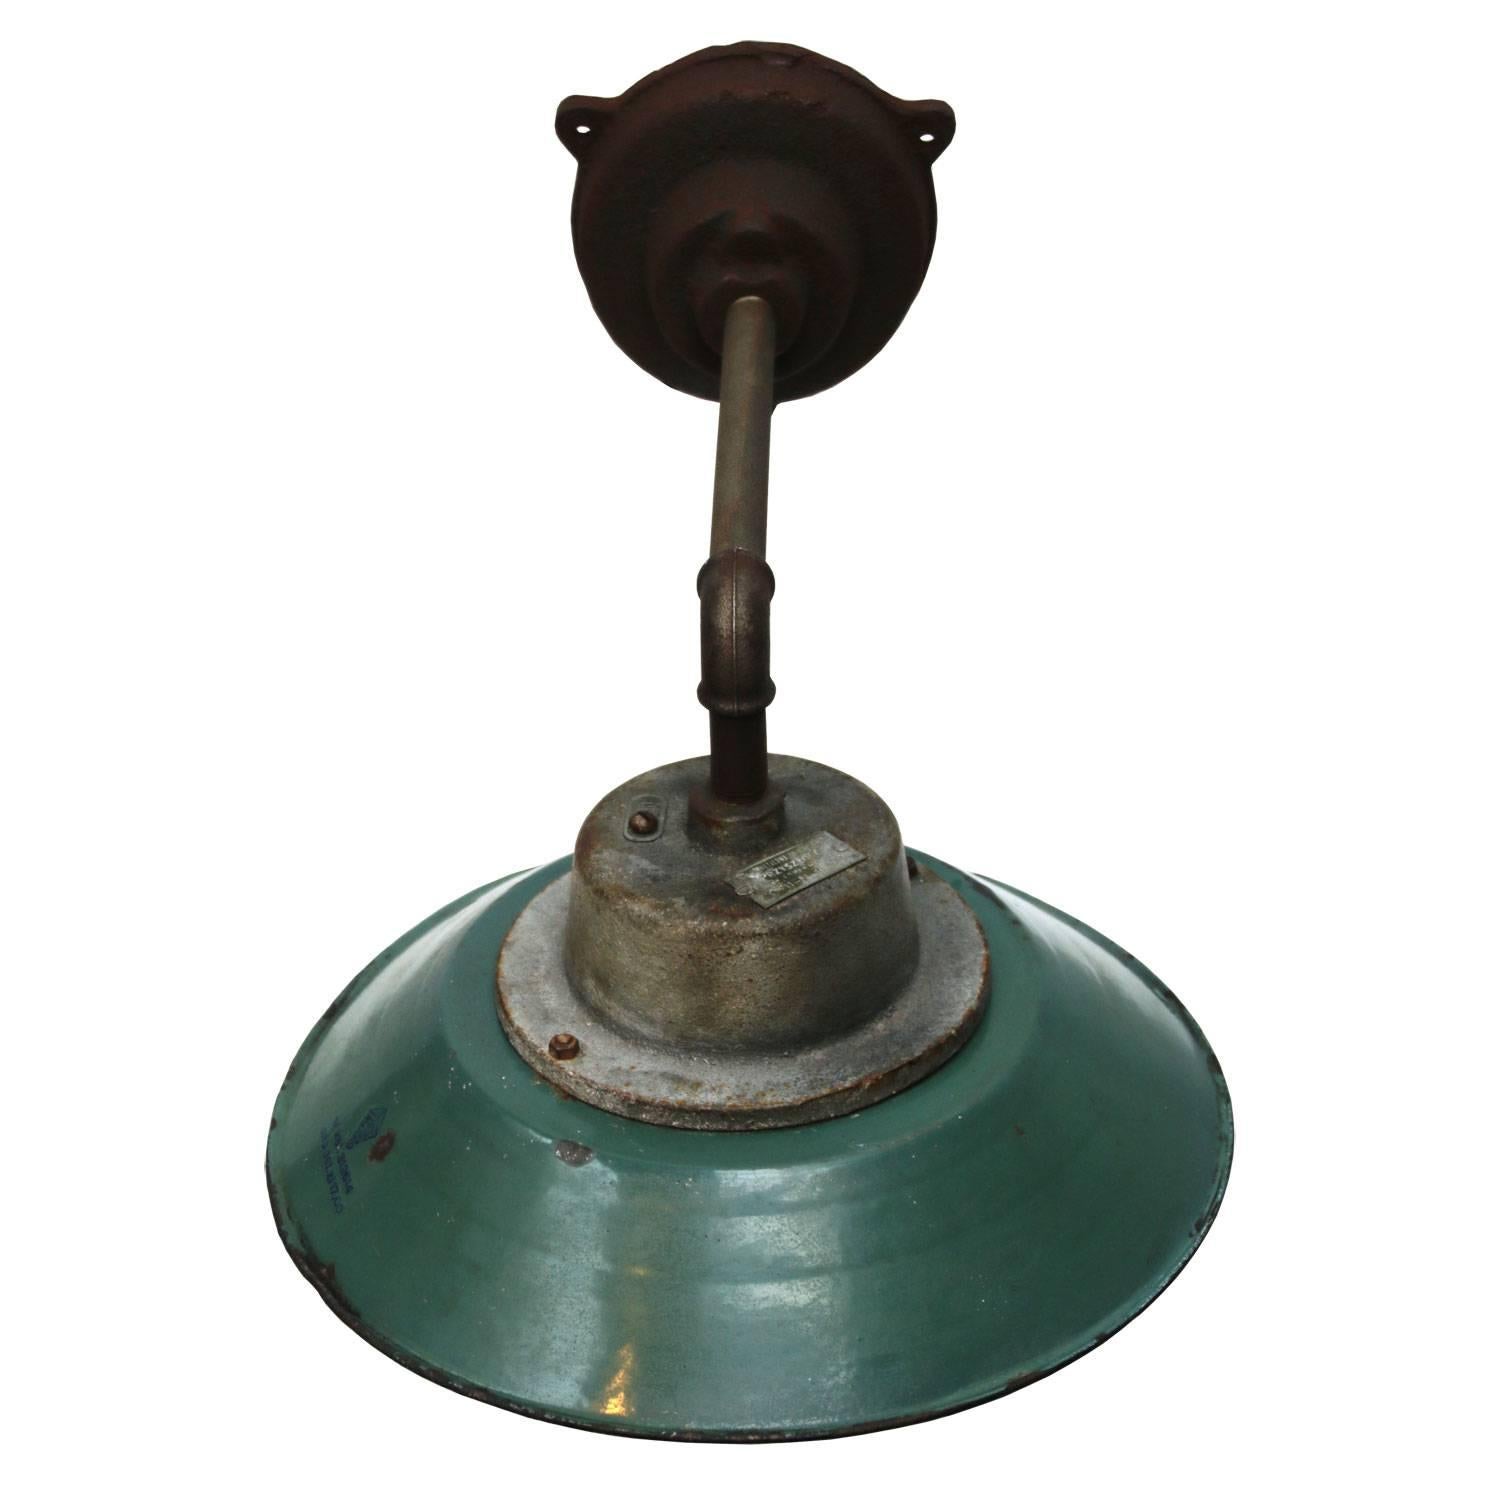 Petrol colored enamel industrial wall light with white interior. Clear glass.
Diameter cast iron wall mount: 12 cm, three holes to secure,

weight: 5.5 kg / 12.1 lb

For use outdoors as well as indoors. 

Priced per individual item. All lamps have